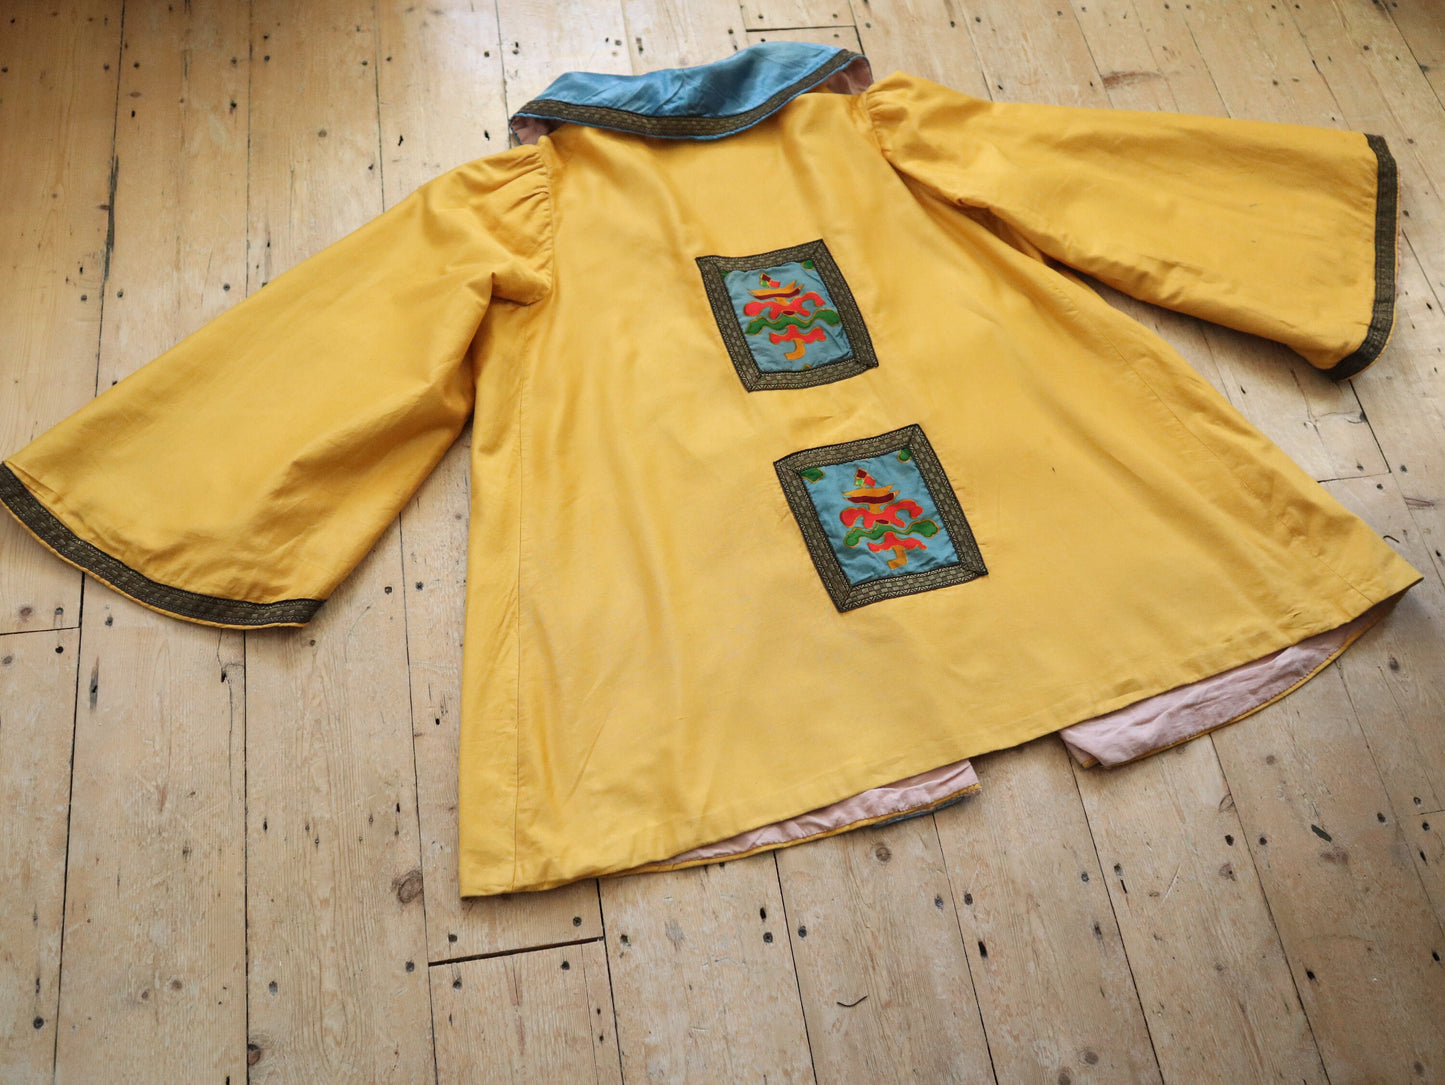 1920s French Theatre Opera Costume Jacket Oriental Style Wide Sleeves Gold Metal Ribbon Trim Yellow Blue